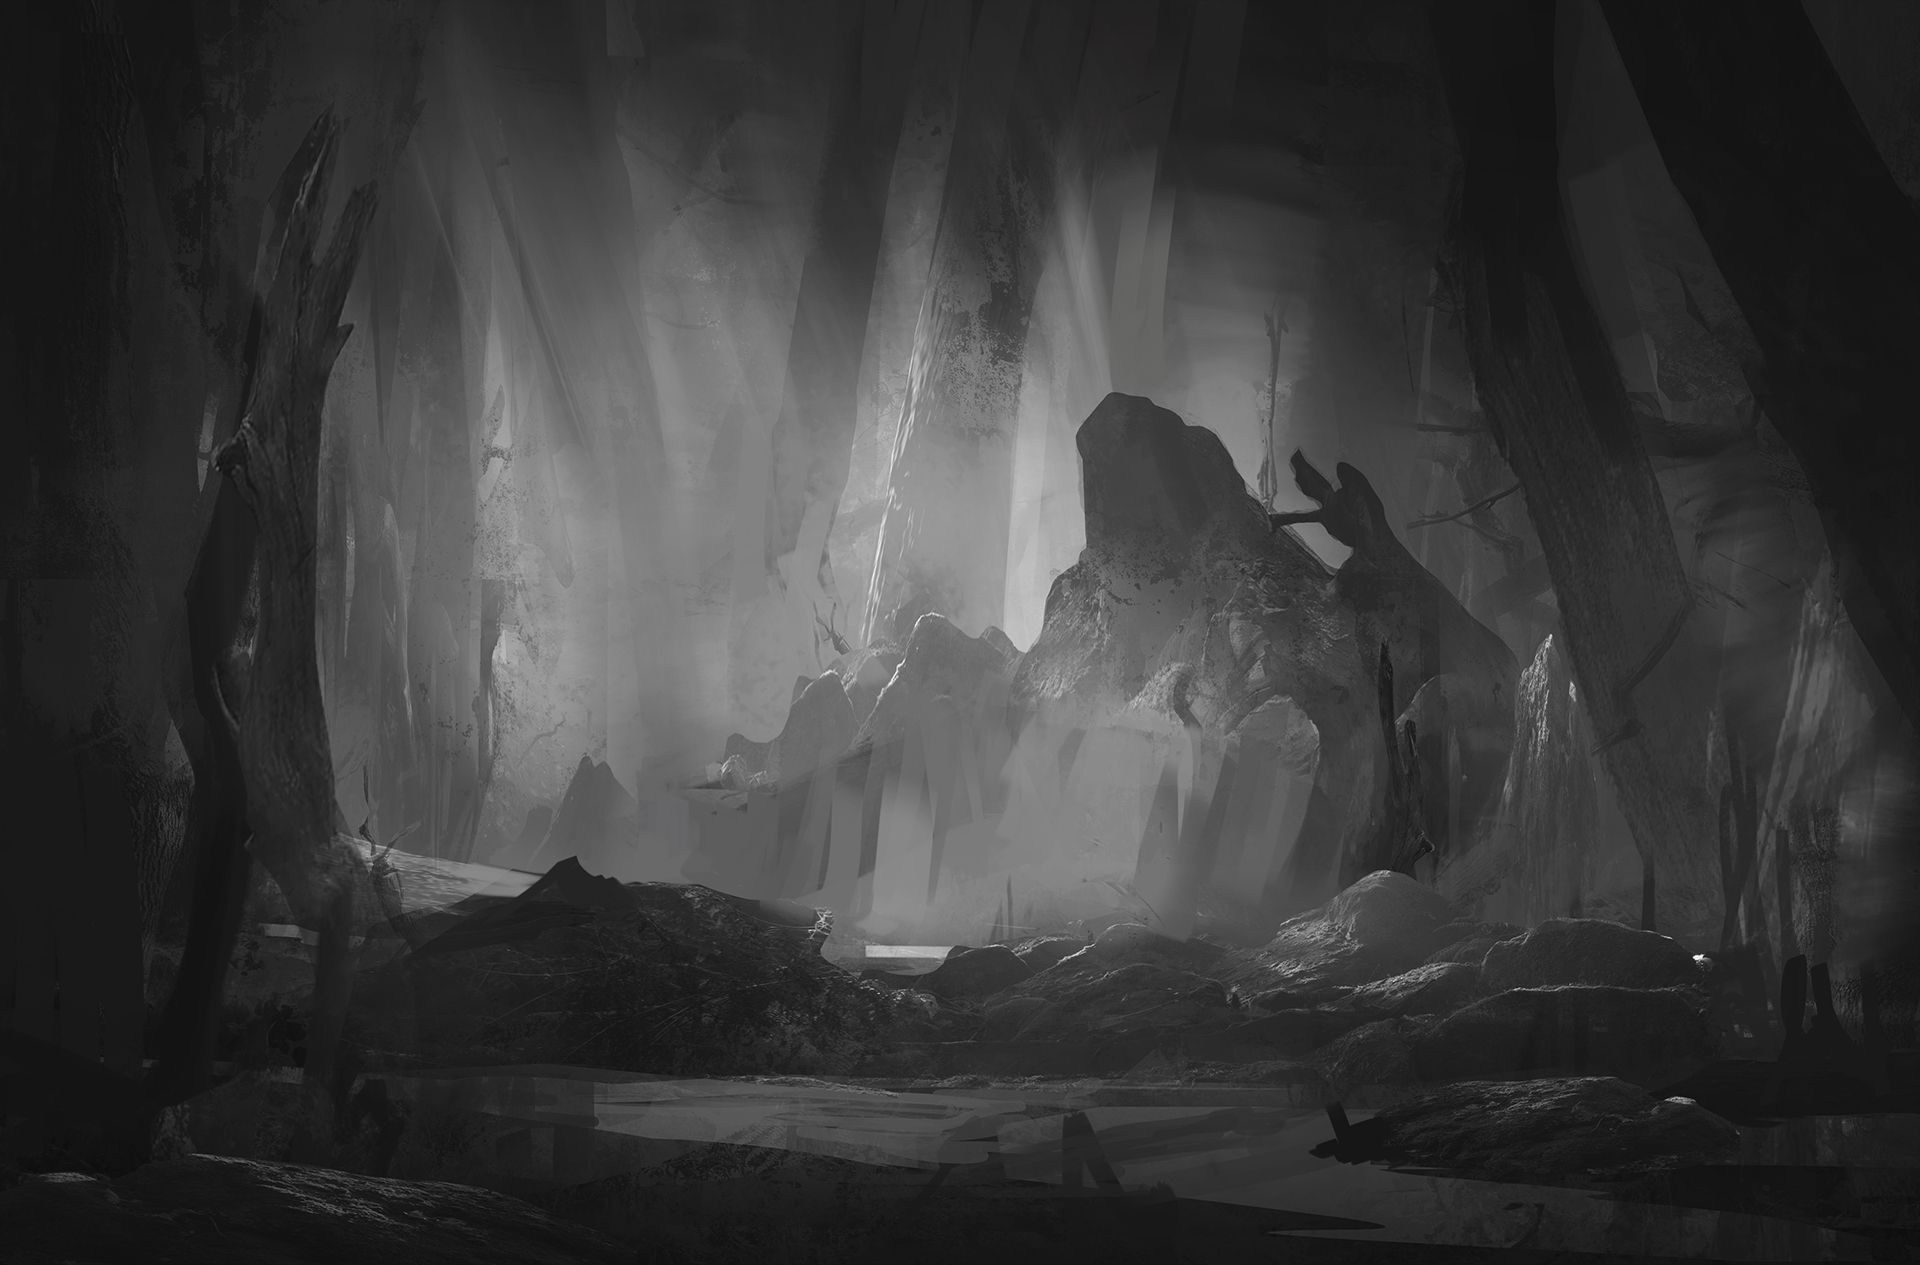 A Mysterious Forest Art Wallpapers